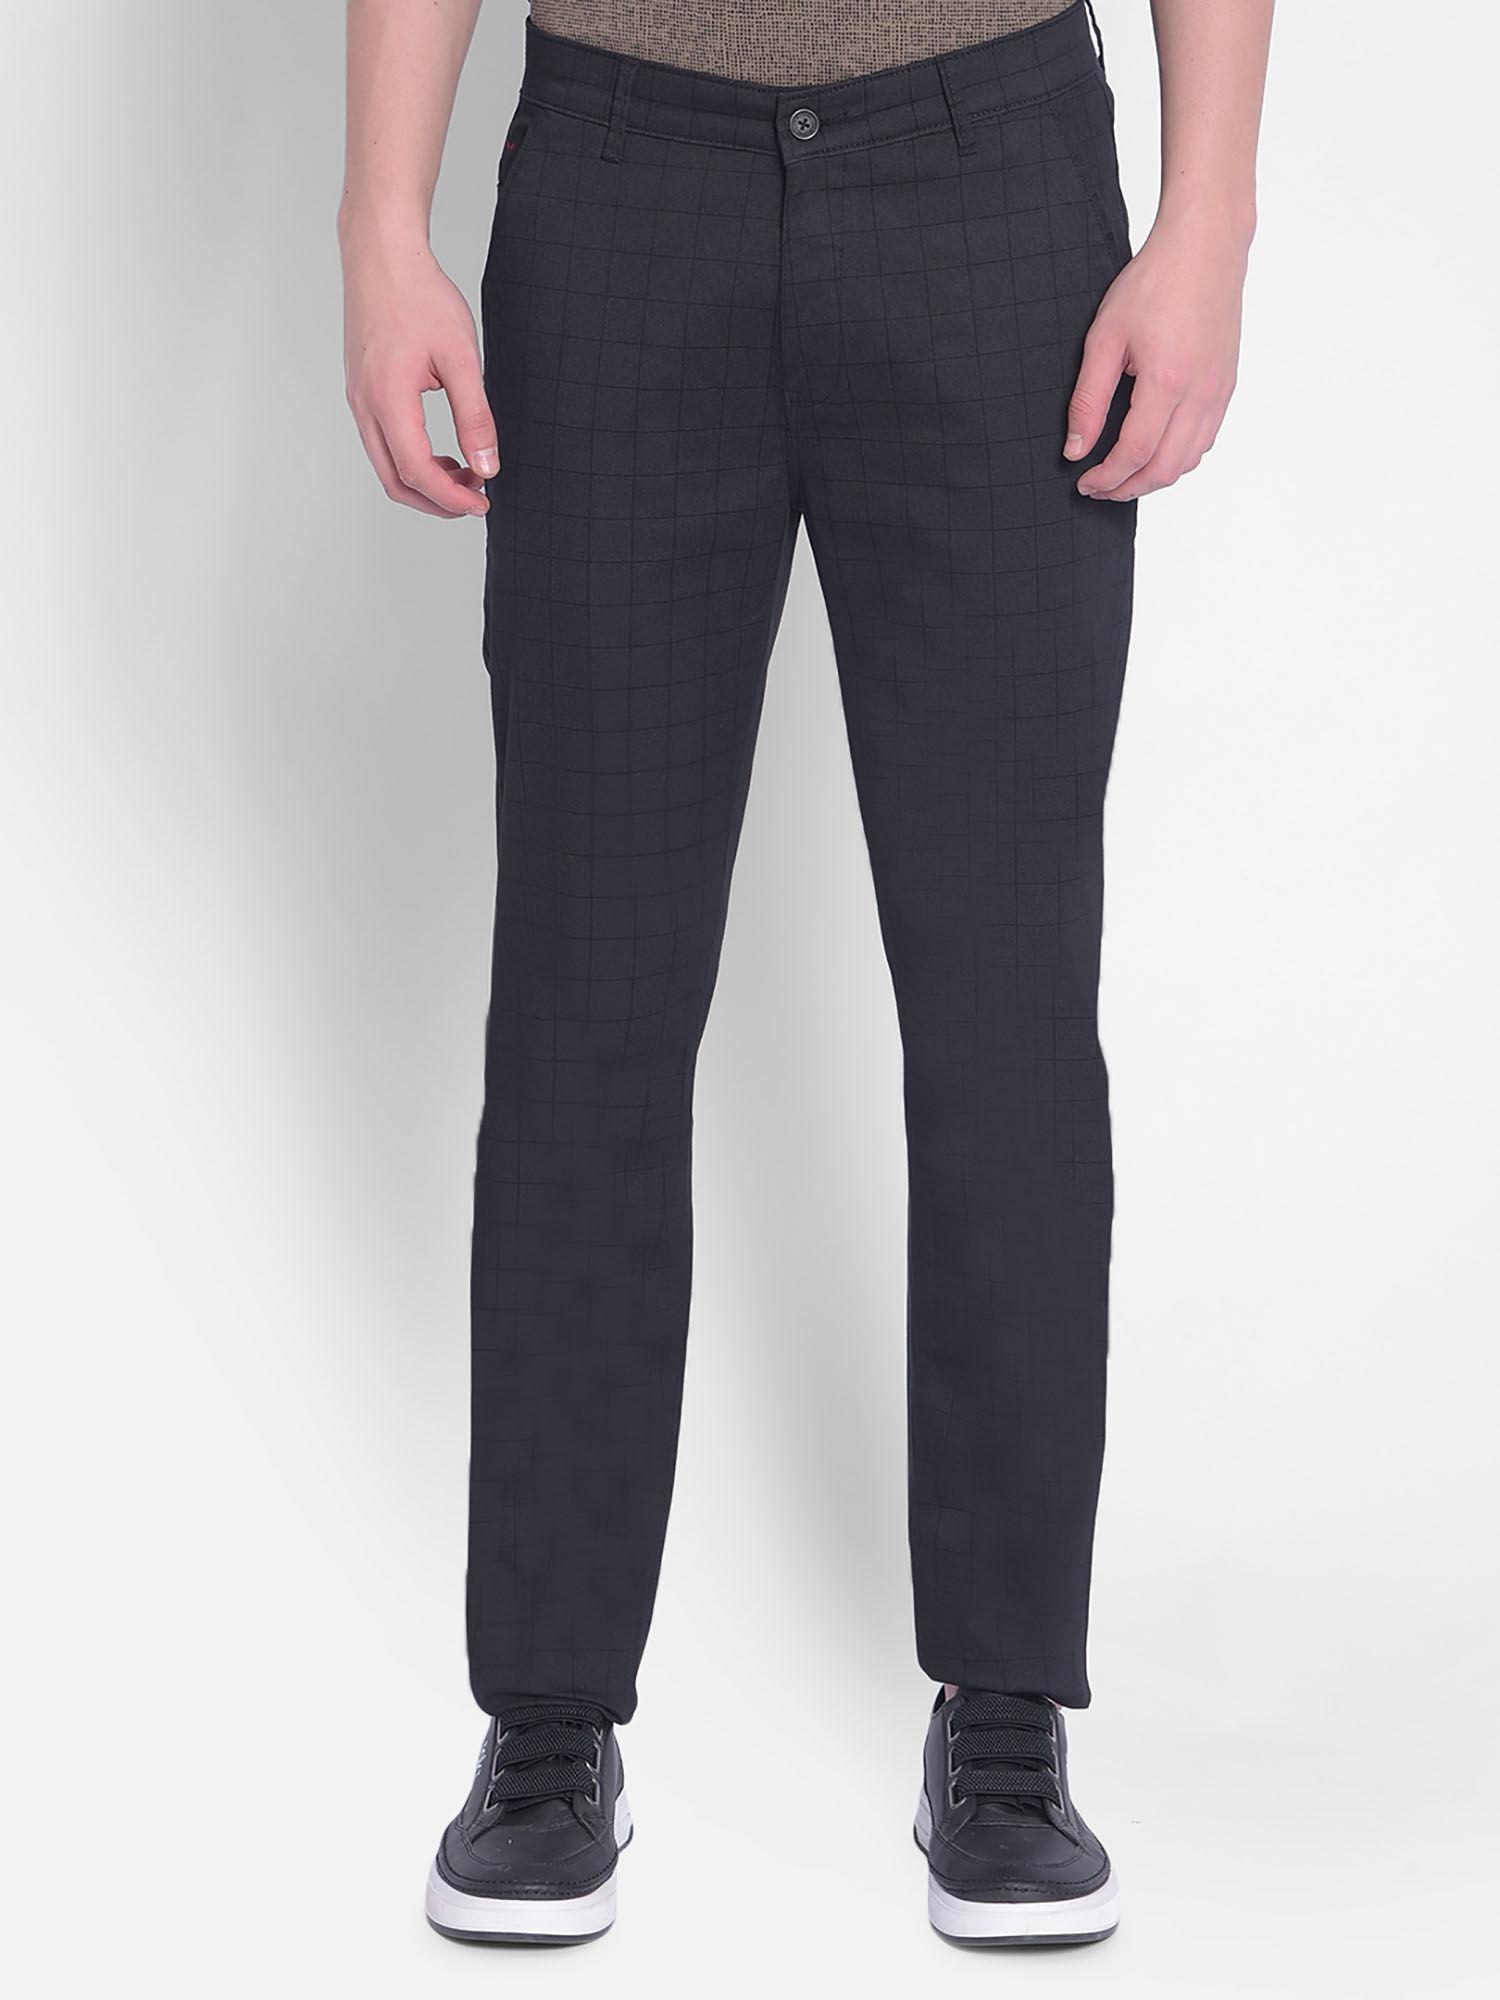 mens black checked trousers